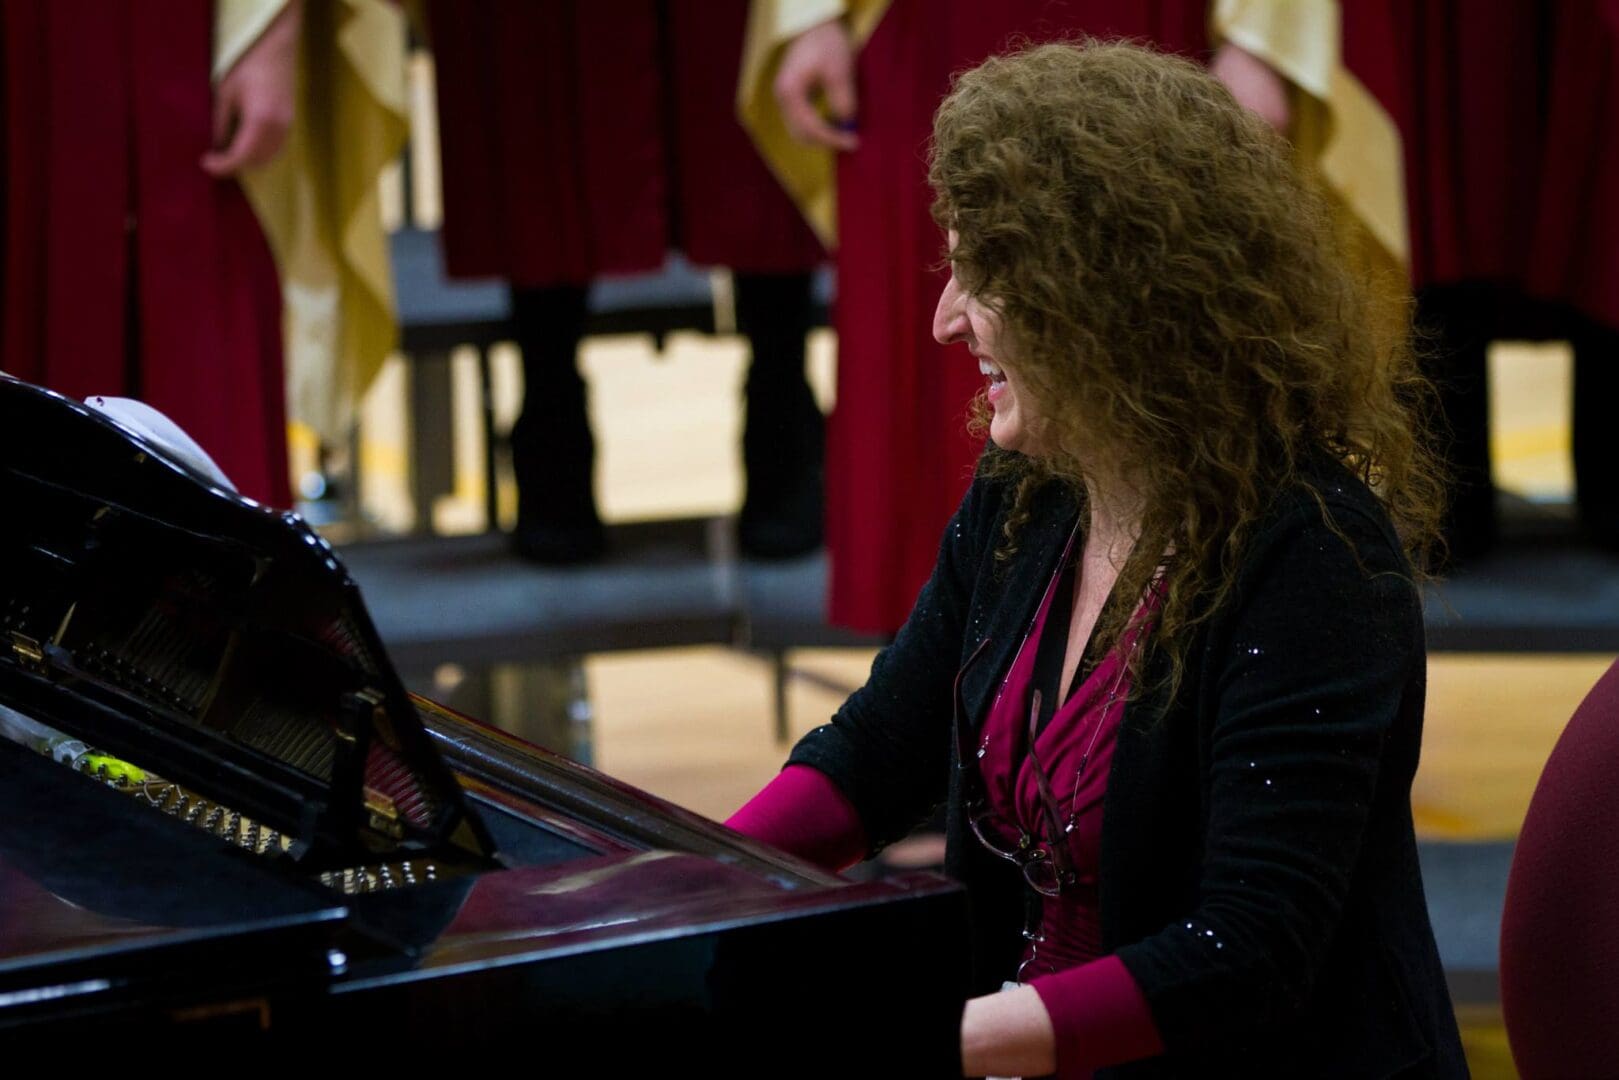 A woman playing a piano in front of a choir.